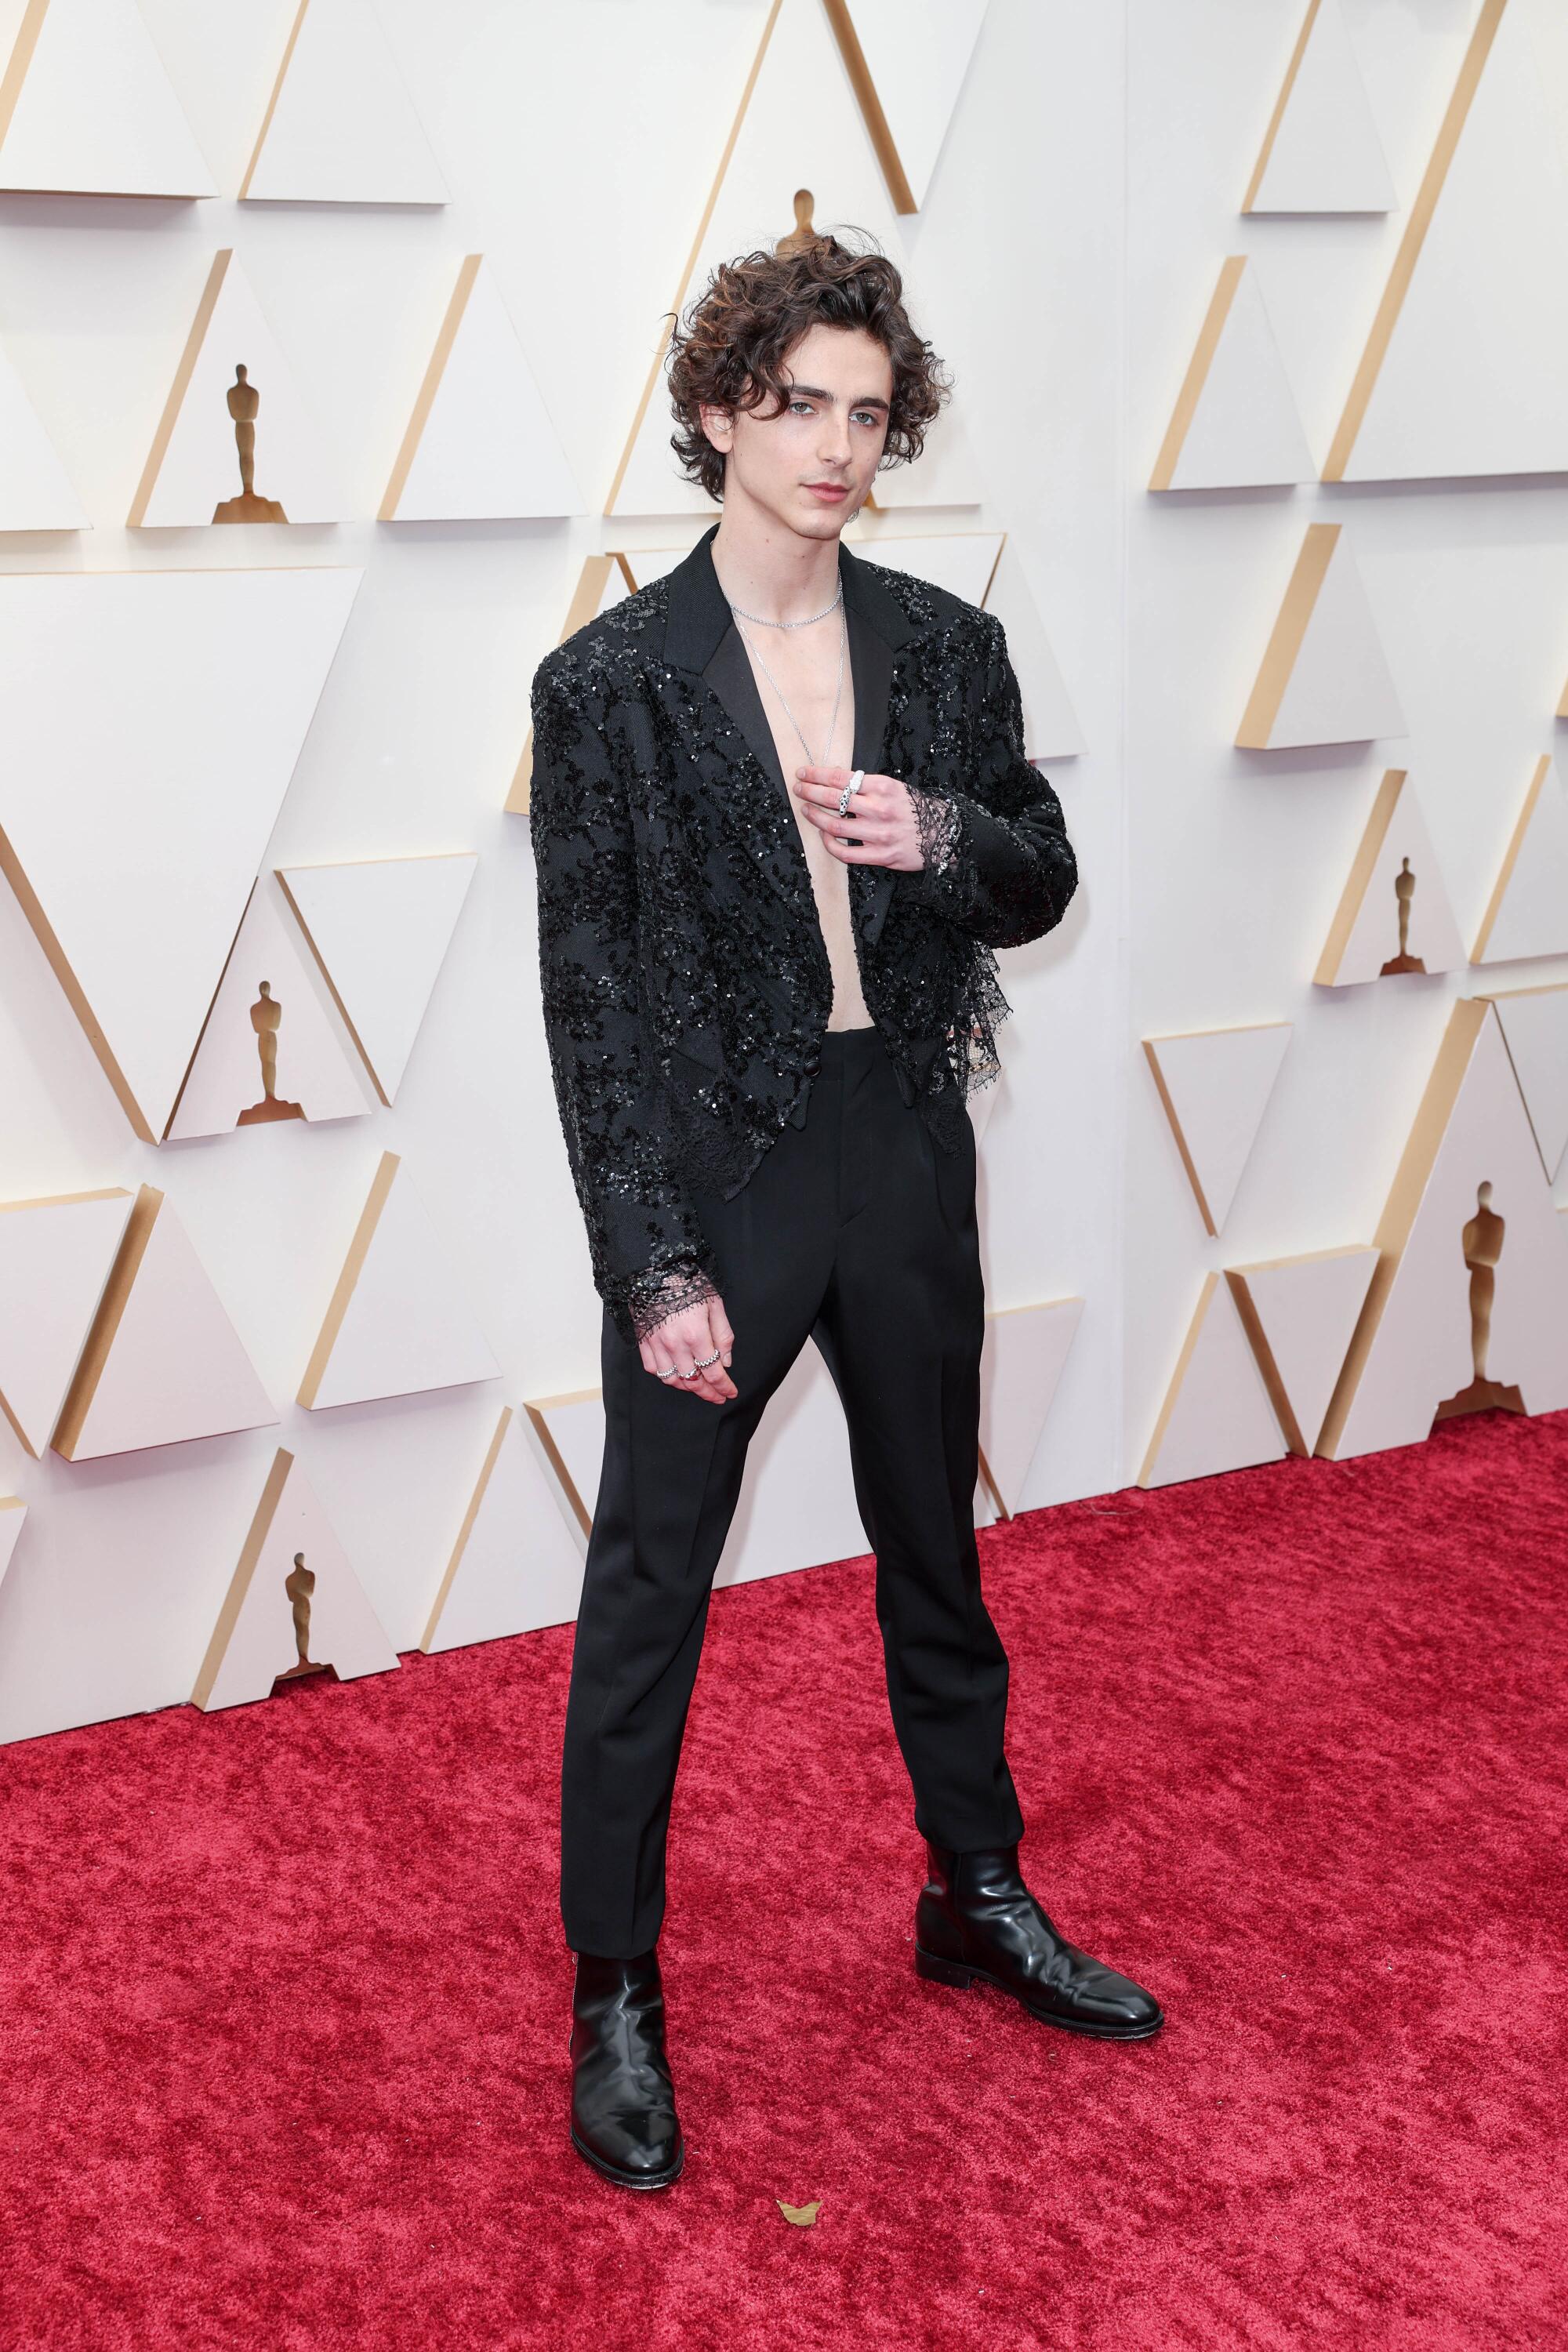 A man shows off his Oscars look on the red carpet.